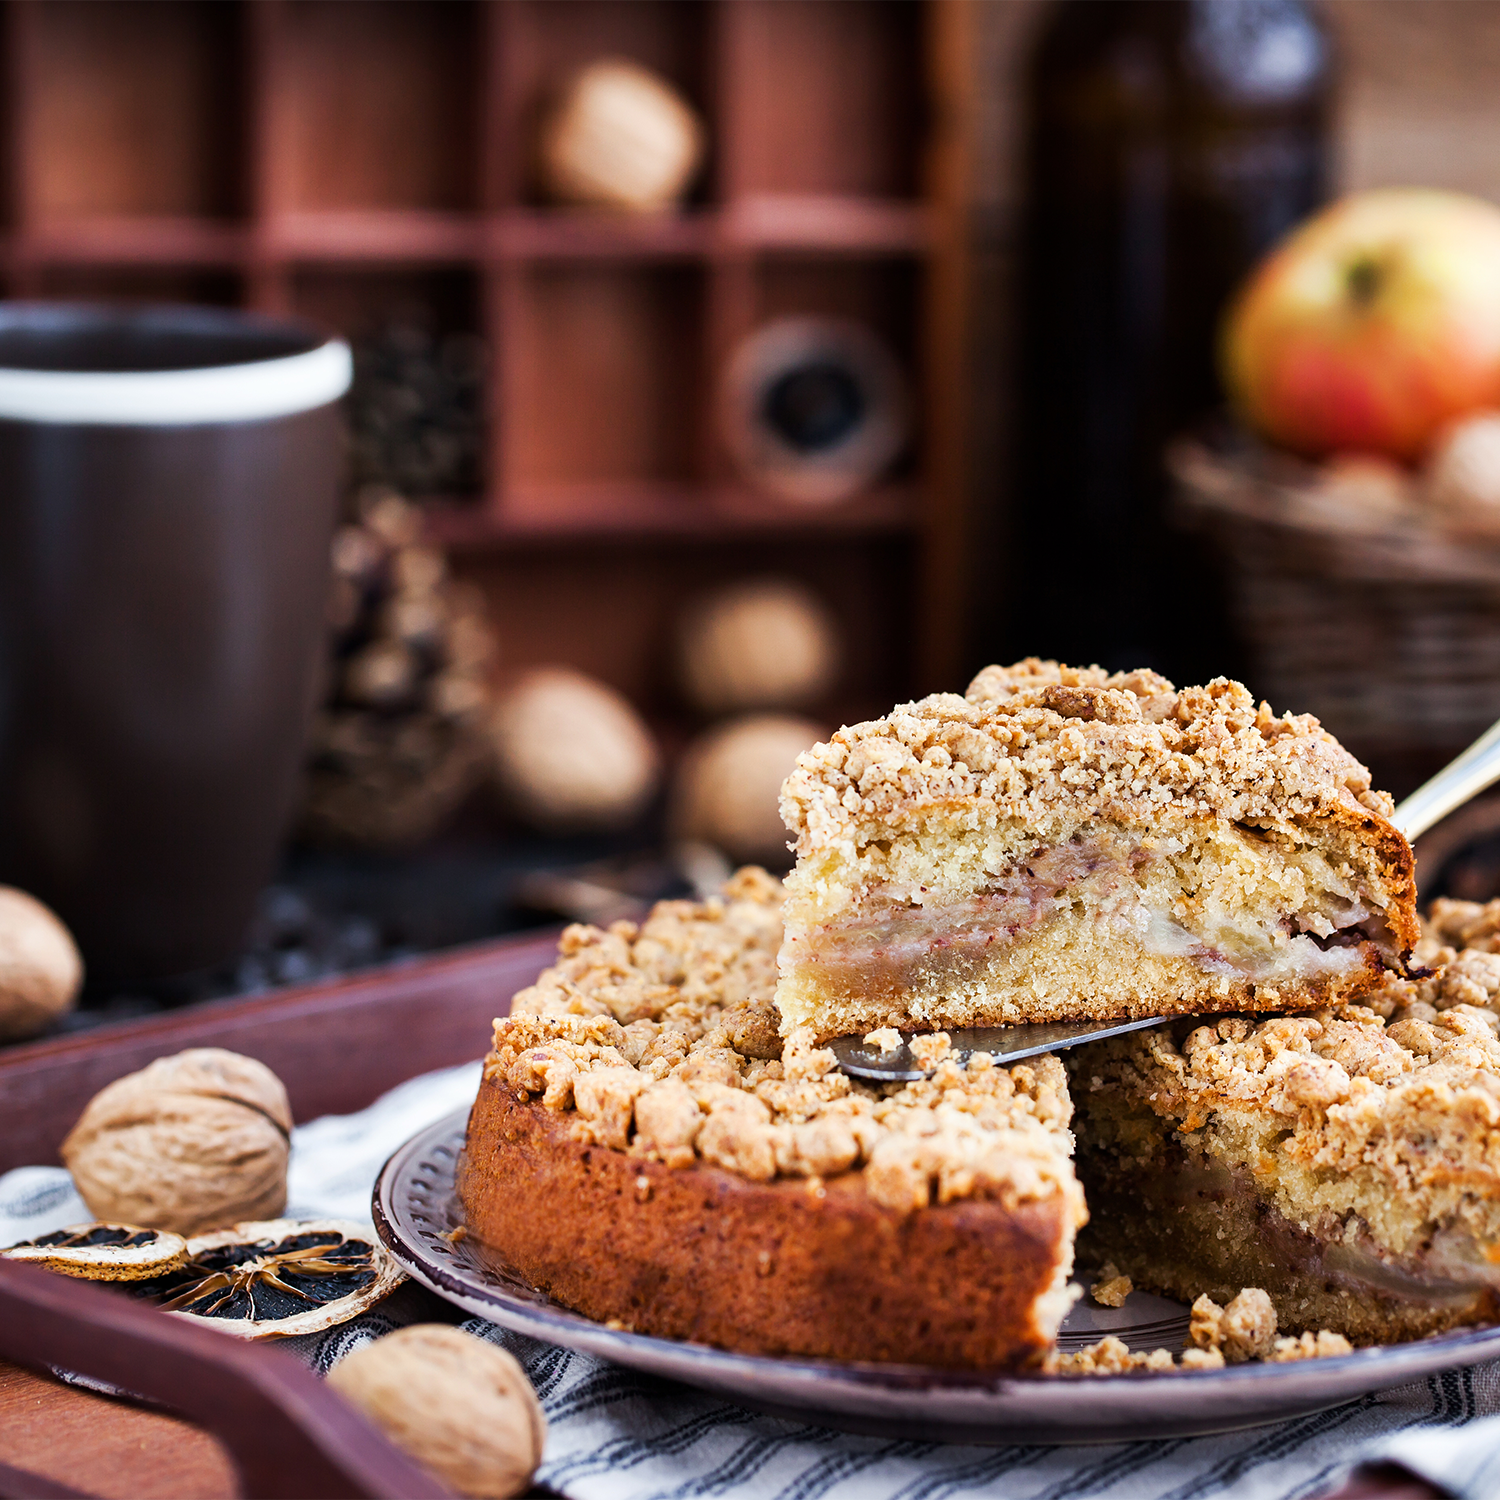 A still life photo of a slice of coffee cake with a crumble topping. This cake is the inspiration for the "Cinnamon Coffee Cake" scented candle from Tuscany candle